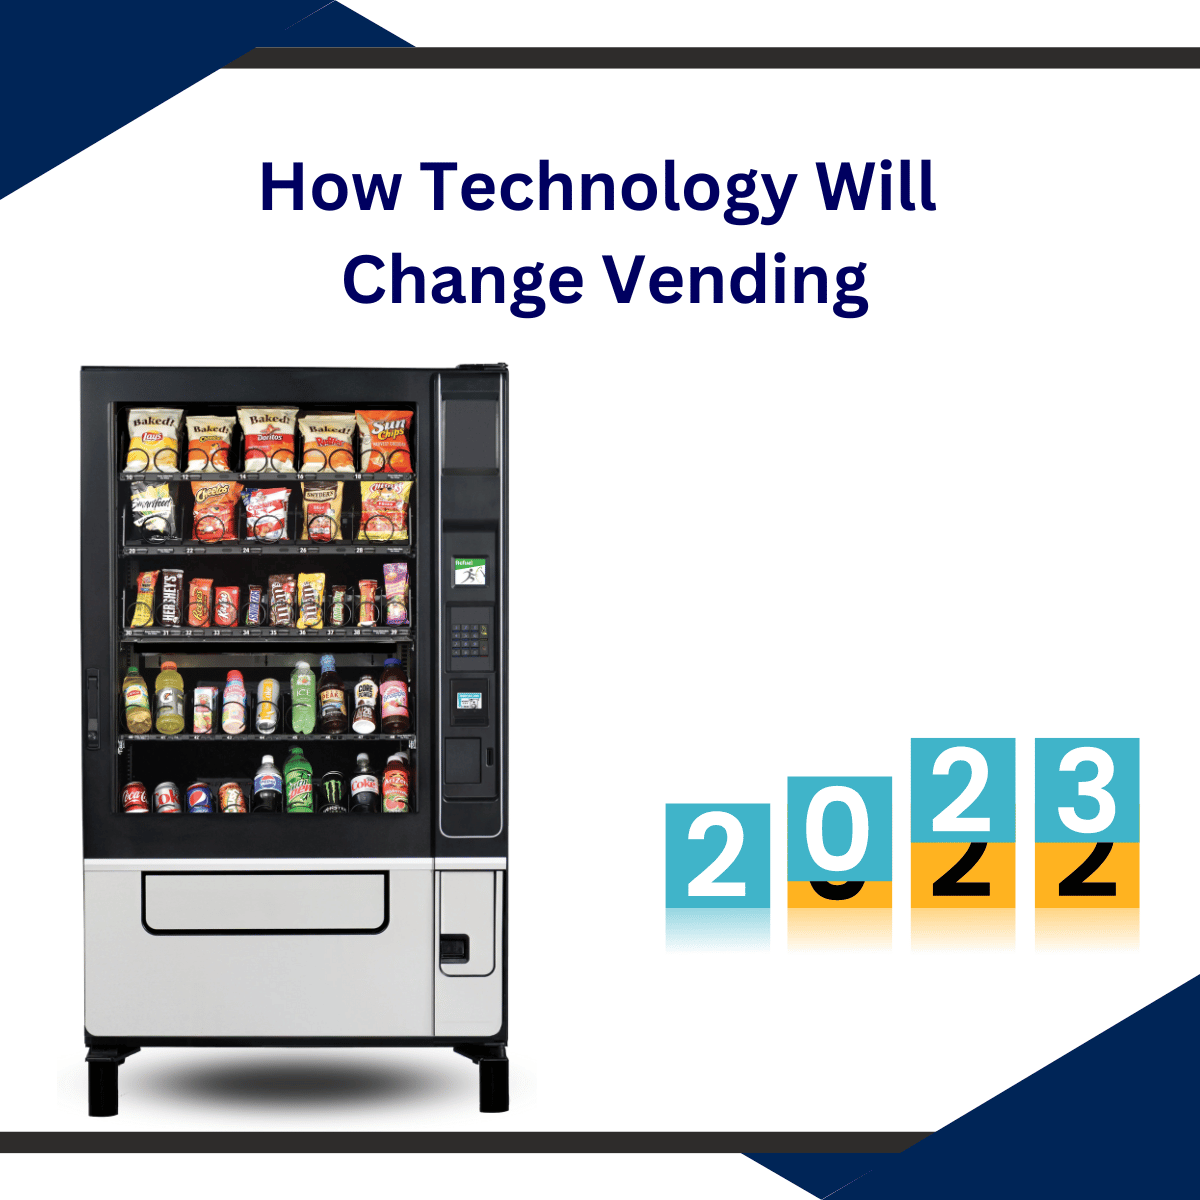 LOOKING TOWARDS THE FUTURE OF VENDING